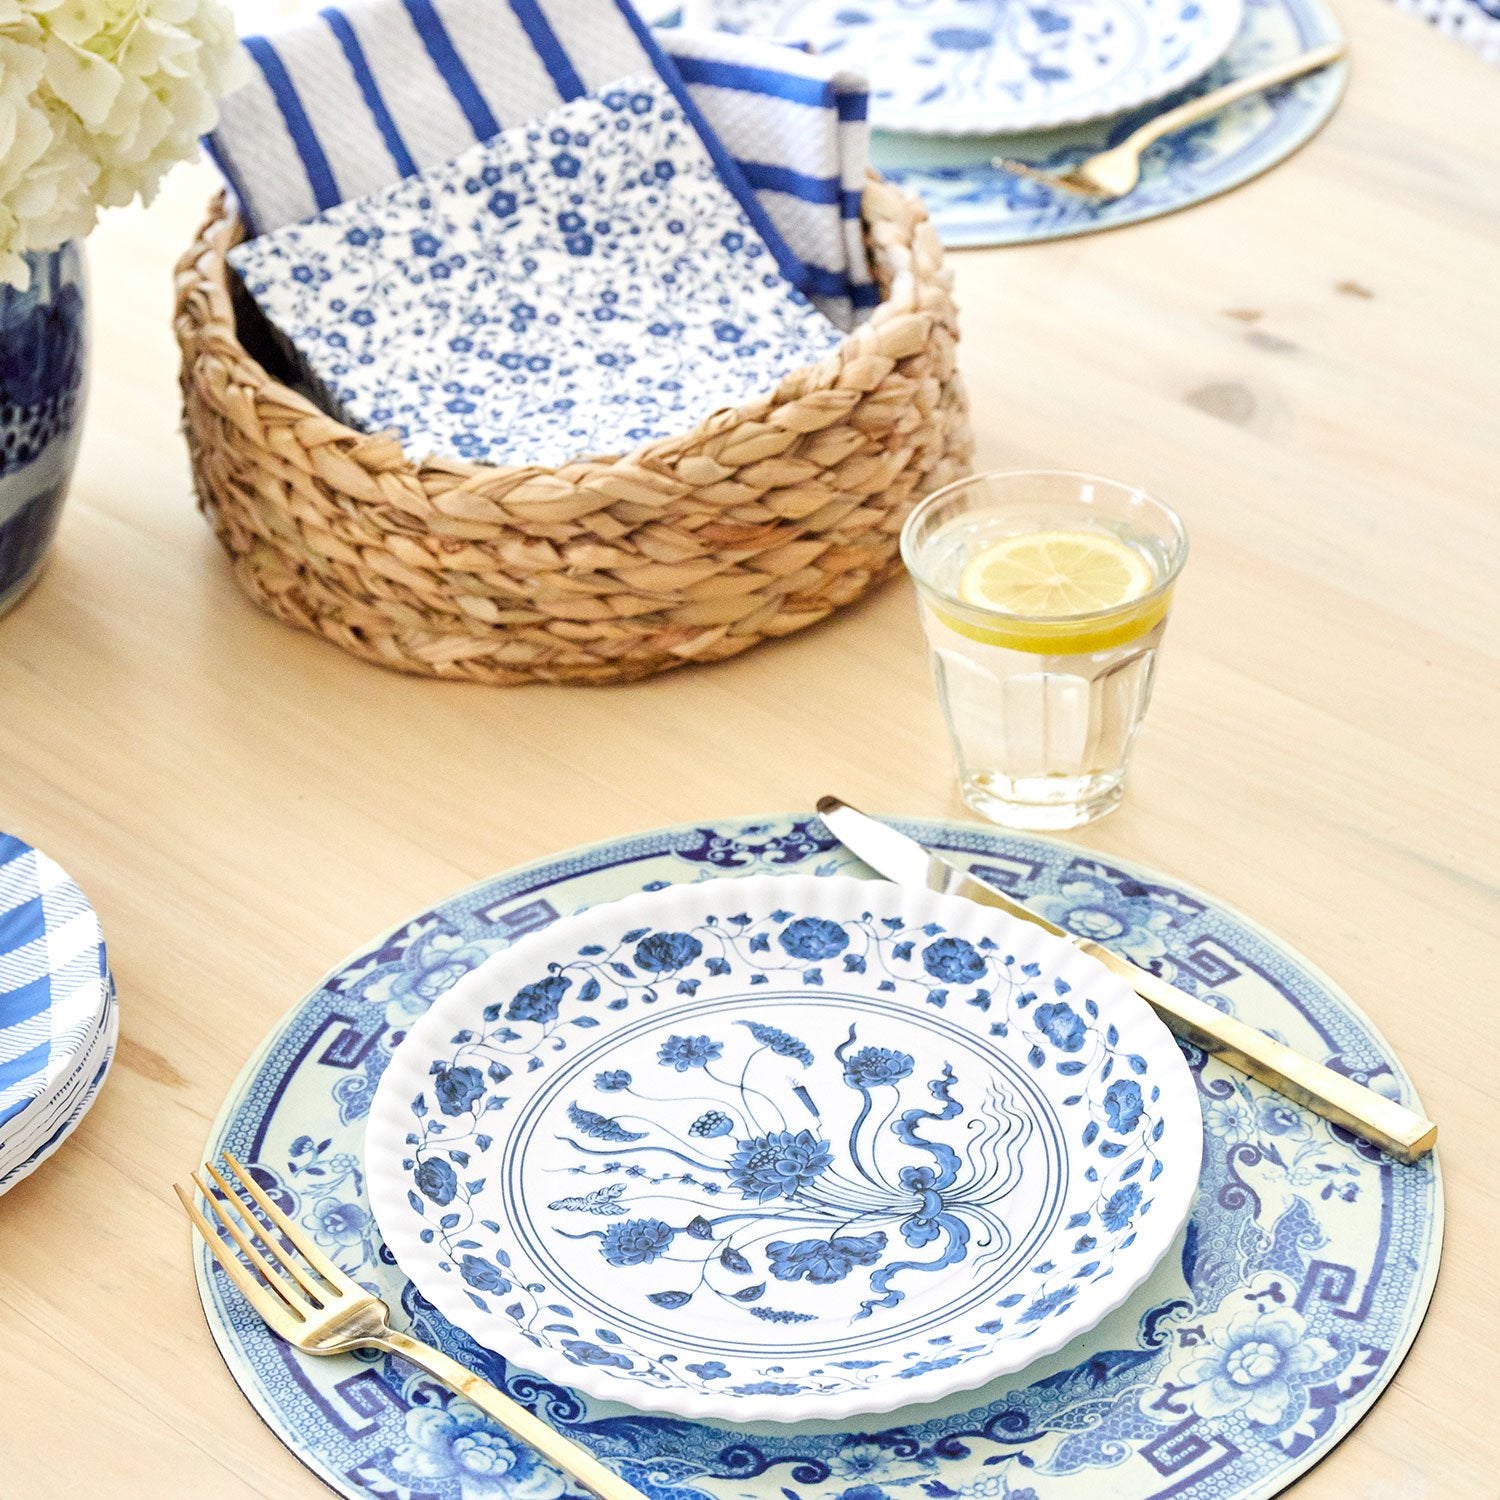 Melamine Blue and White Plate with Botanical Design on Table